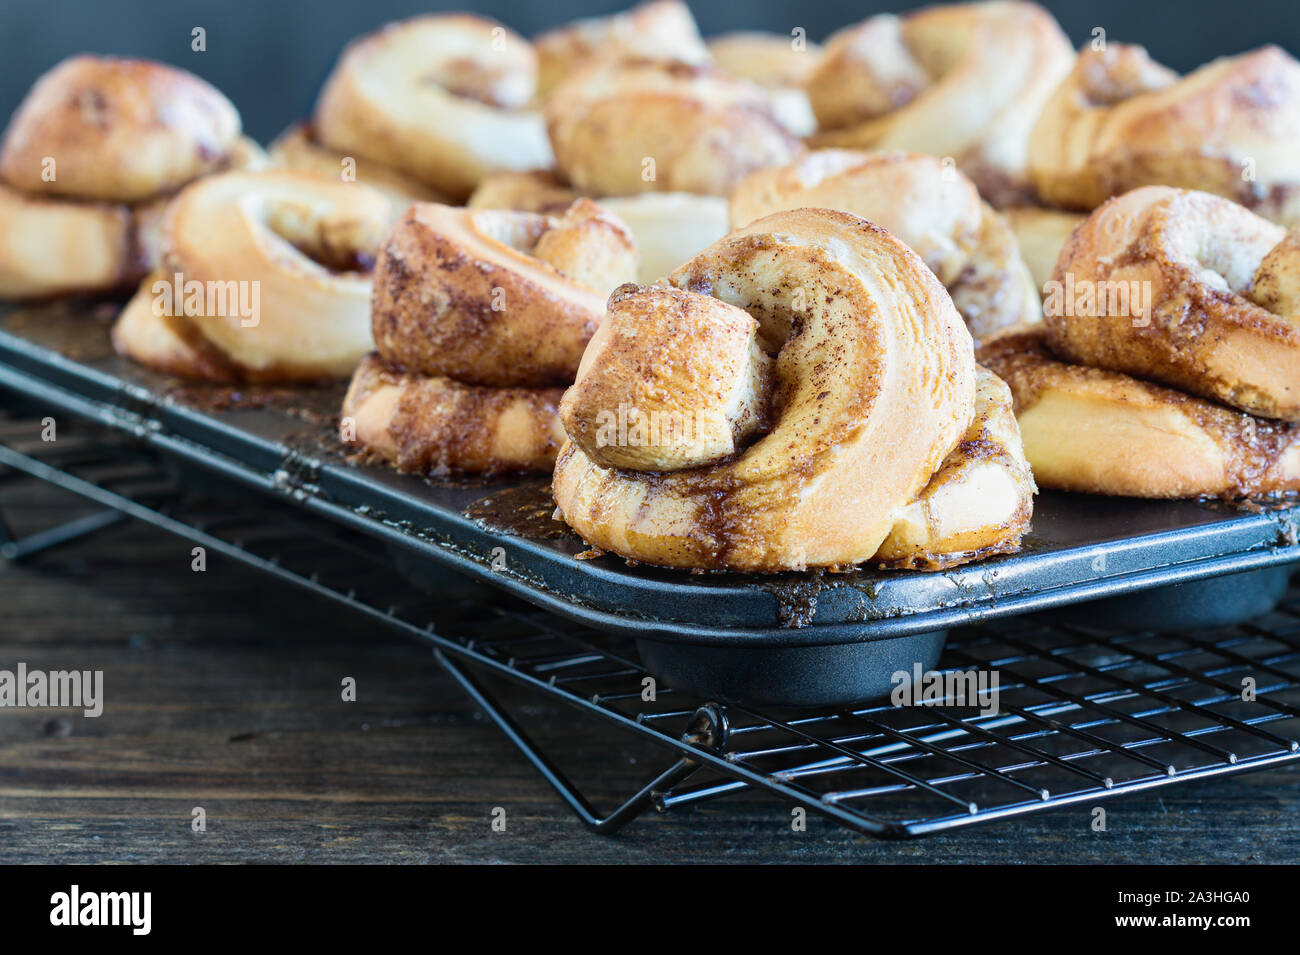 Fresh homemade tall cinnamon rolls still in the muffin tin over a rustic wood table. Selective focus on bun in the foreground with blurred background. Stock Photo